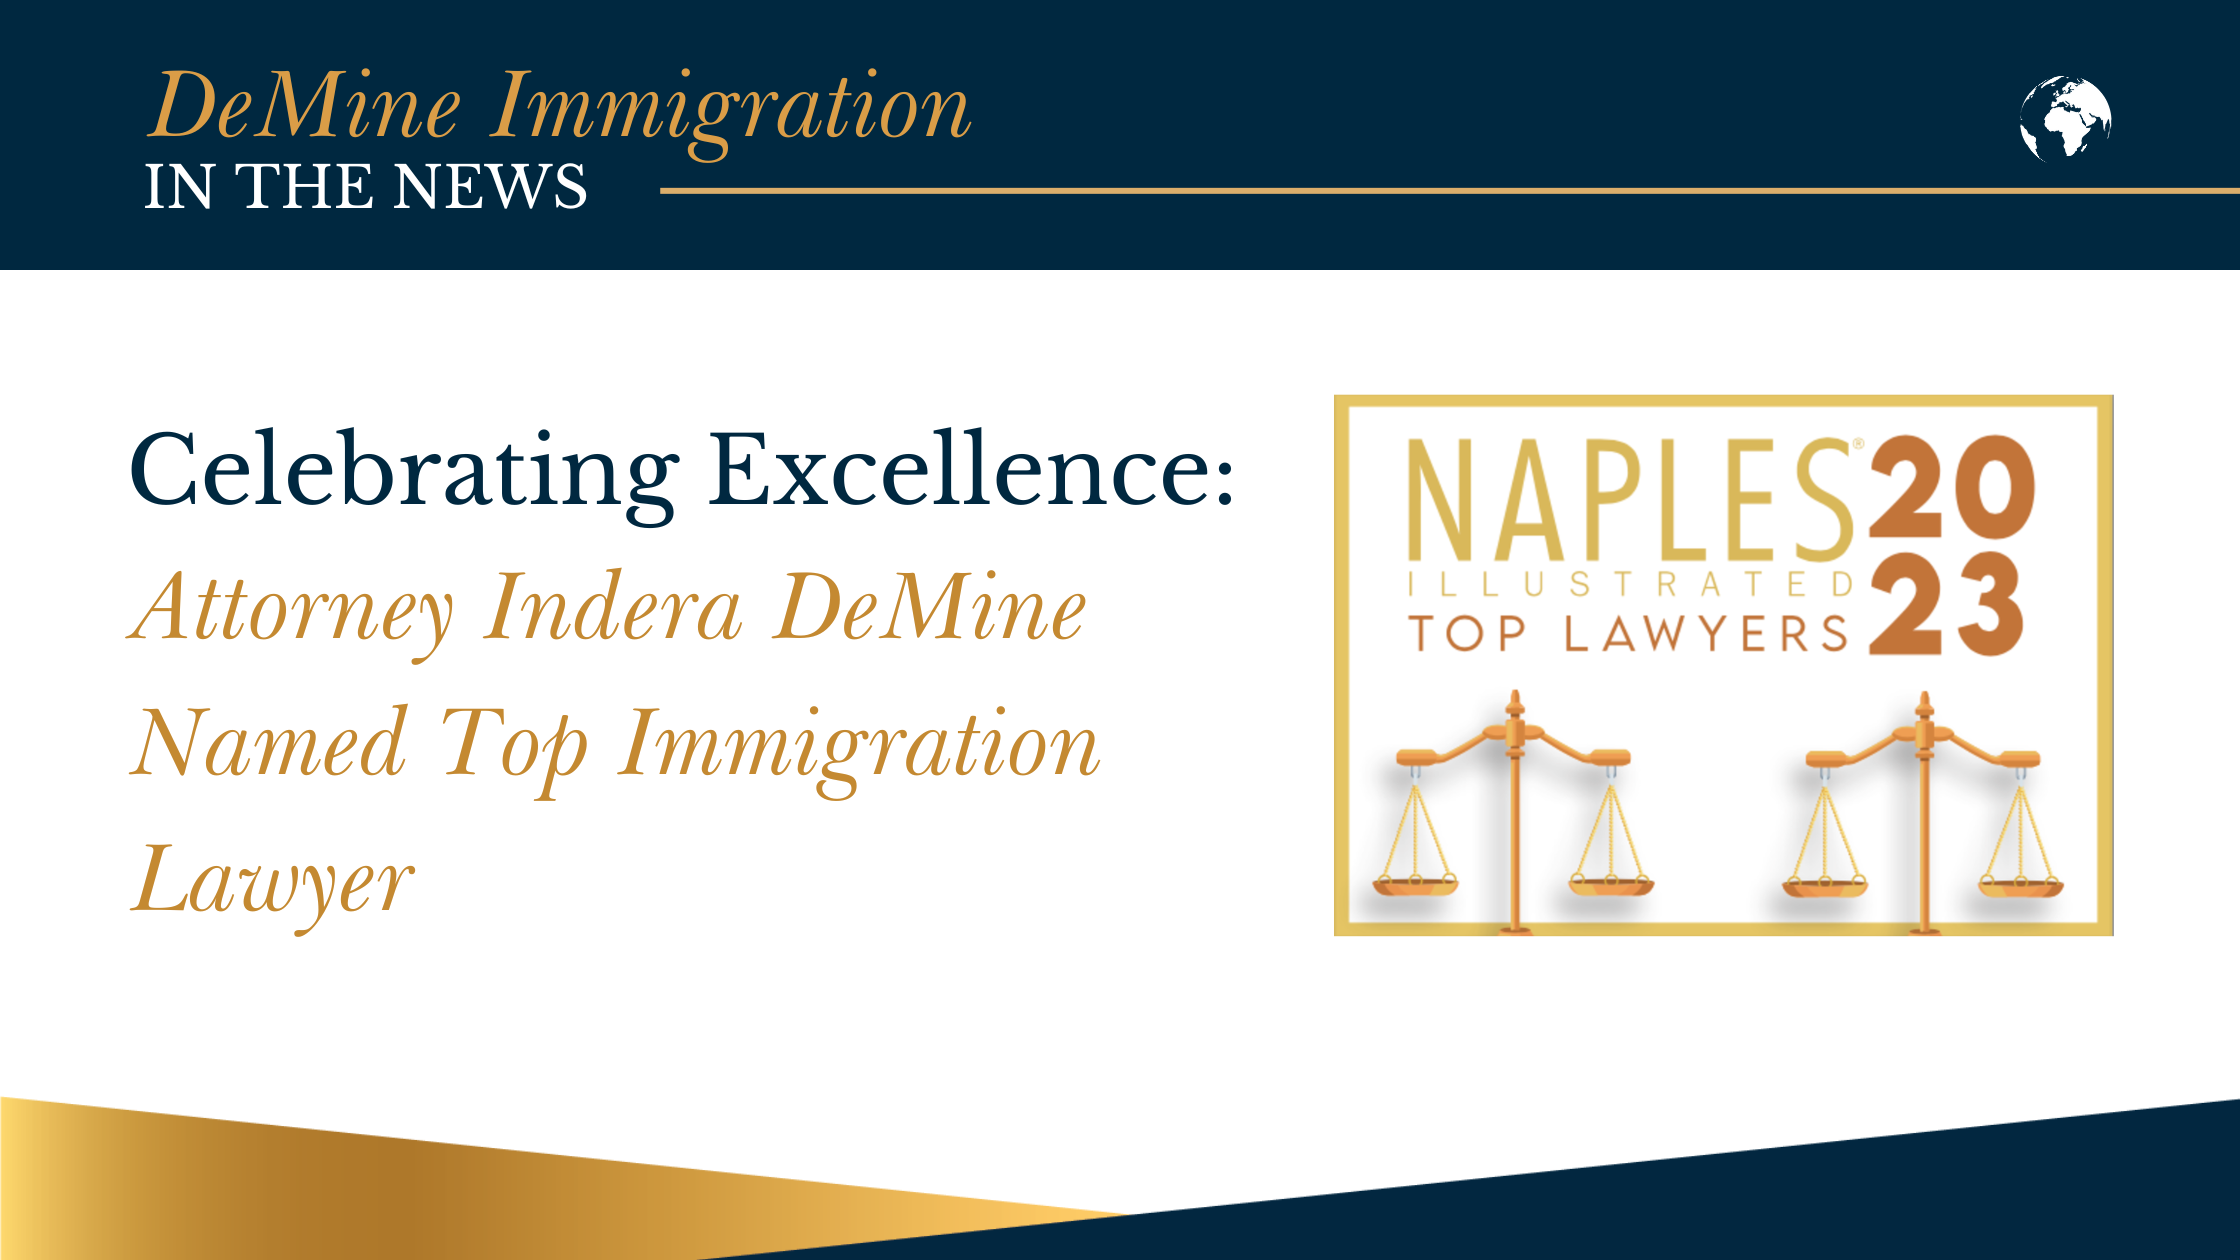 Celebrating Excellence: Attorney Indera DeMine - A Top Immigration Lawyer